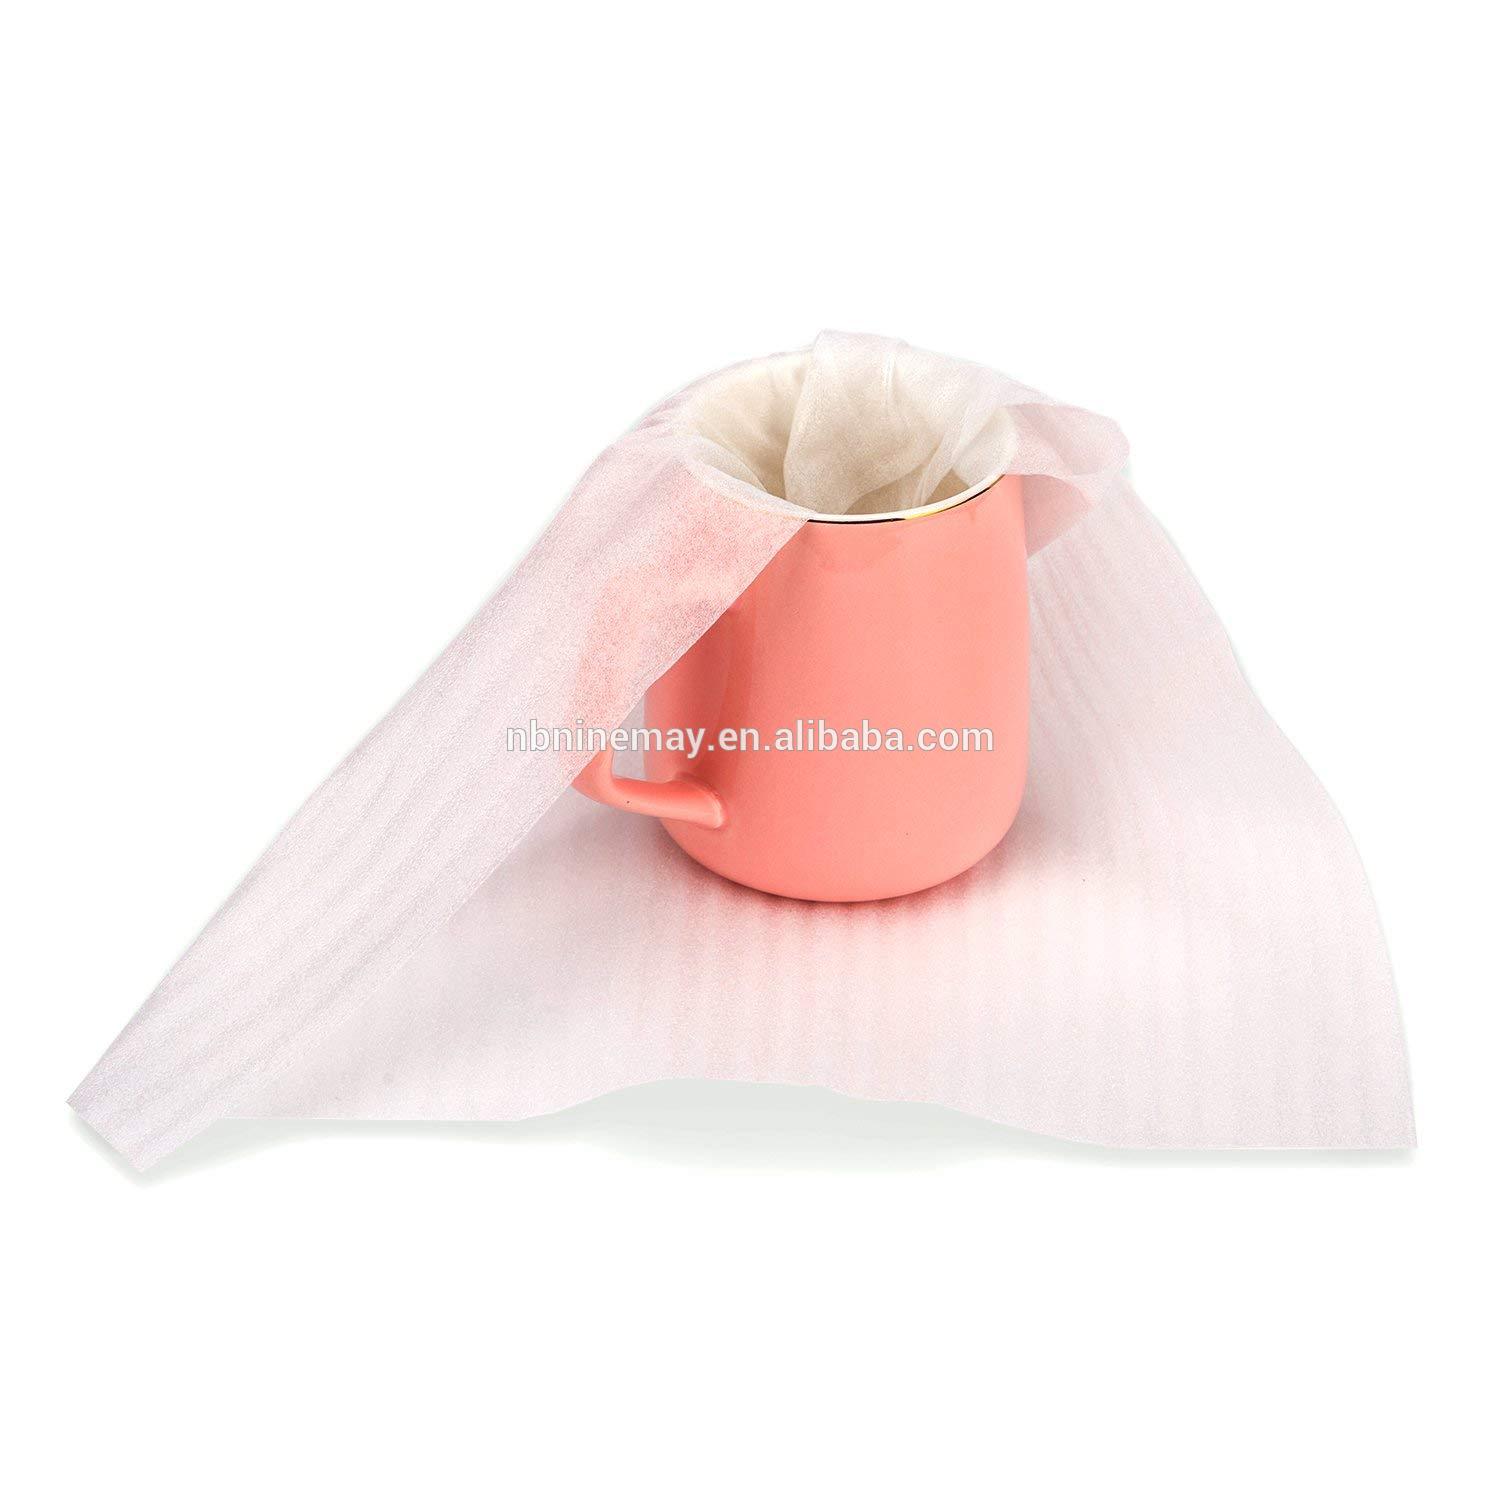 Factory EPE Cushion foam wrap sheets moving supplies packing material all purpose protection storage